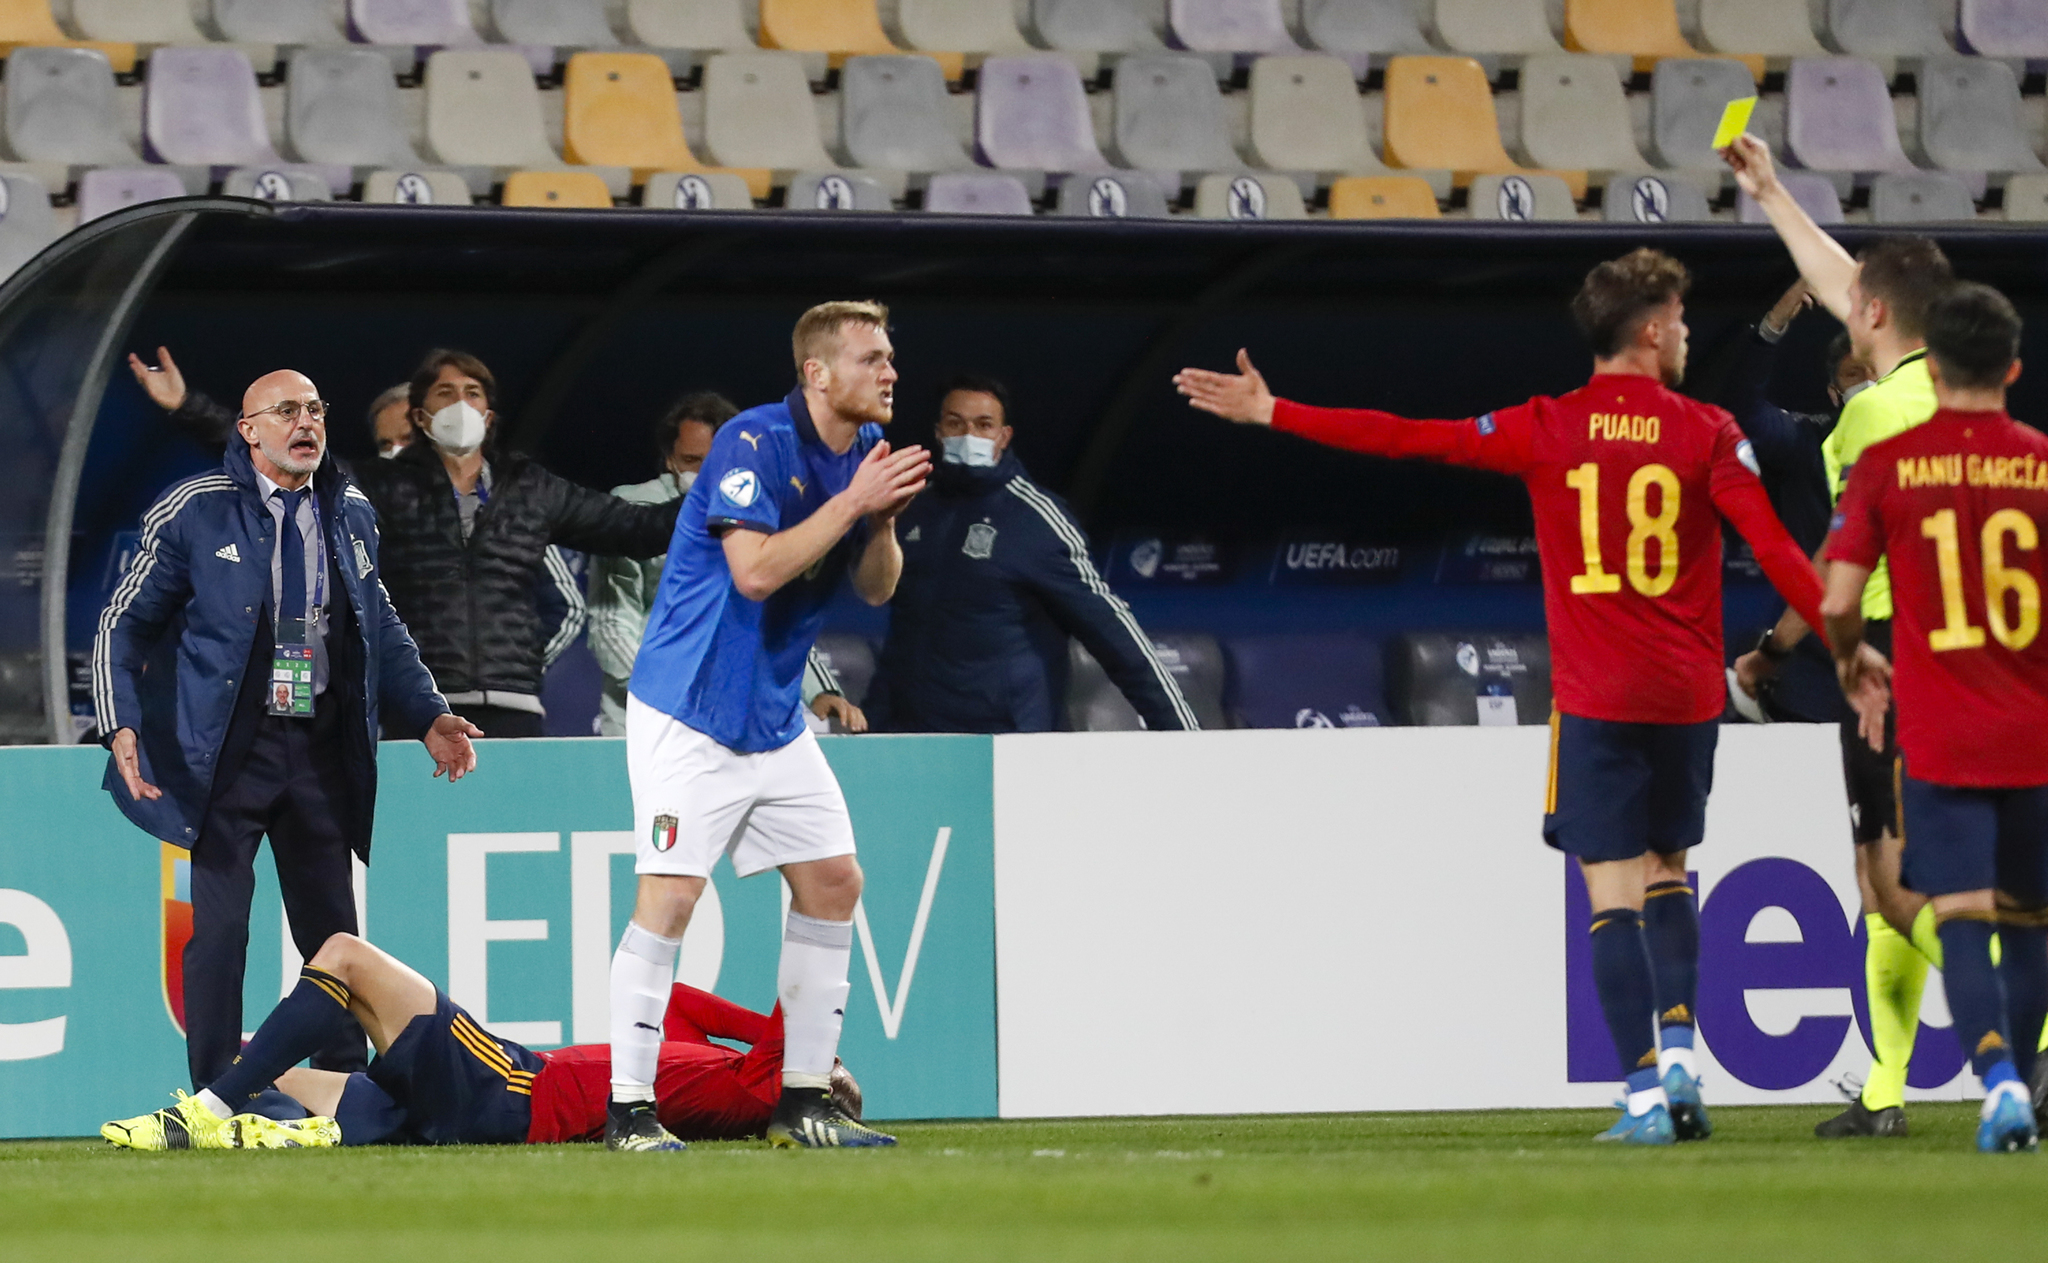 Spain coach Luis de la Fuente, left, reacts after his player Oscar Mingueza is fouled by Italy's Tommaso Pobega during the Euro U21 group C soccer match between Spain and Italy in lt;HIT gt;Maribor lt;/HIT gt;, Slovenia, Saturday, March 27, 2021. (AP Photo/Darko Bandic)